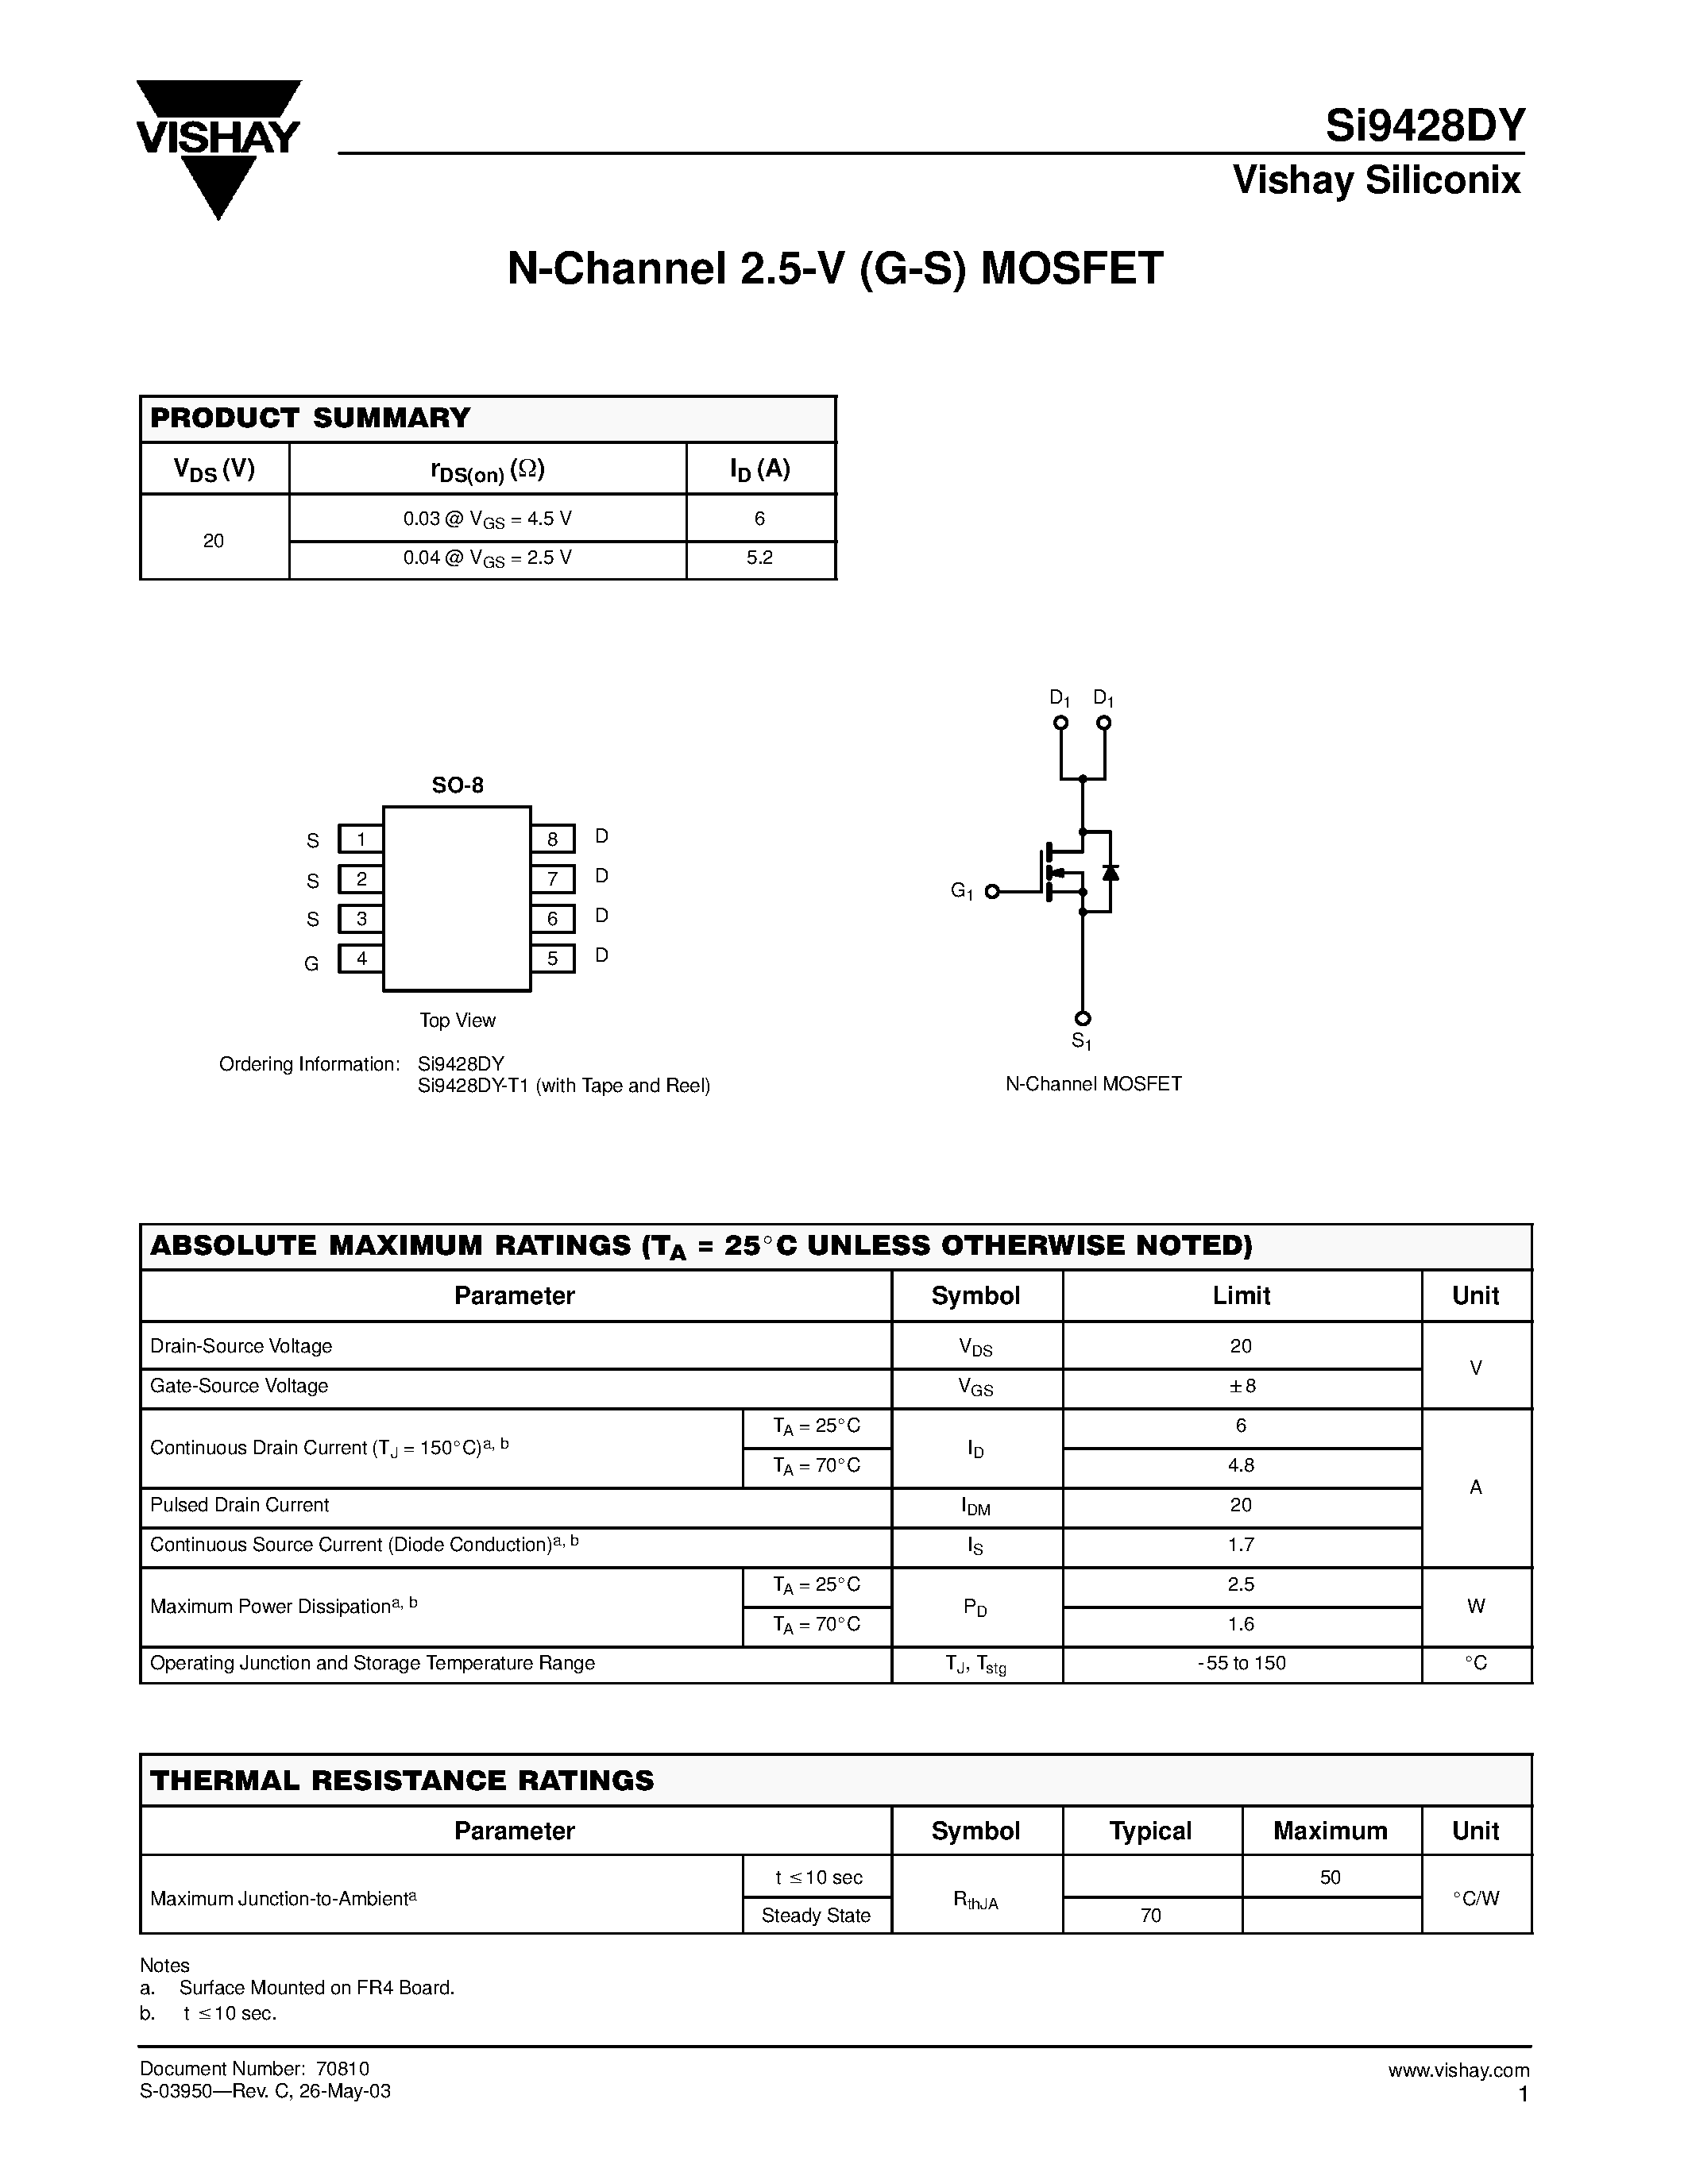 Datasheet SI9428DY-T1 - N-Channel 2.5-V (G-S) MOSFET page 1